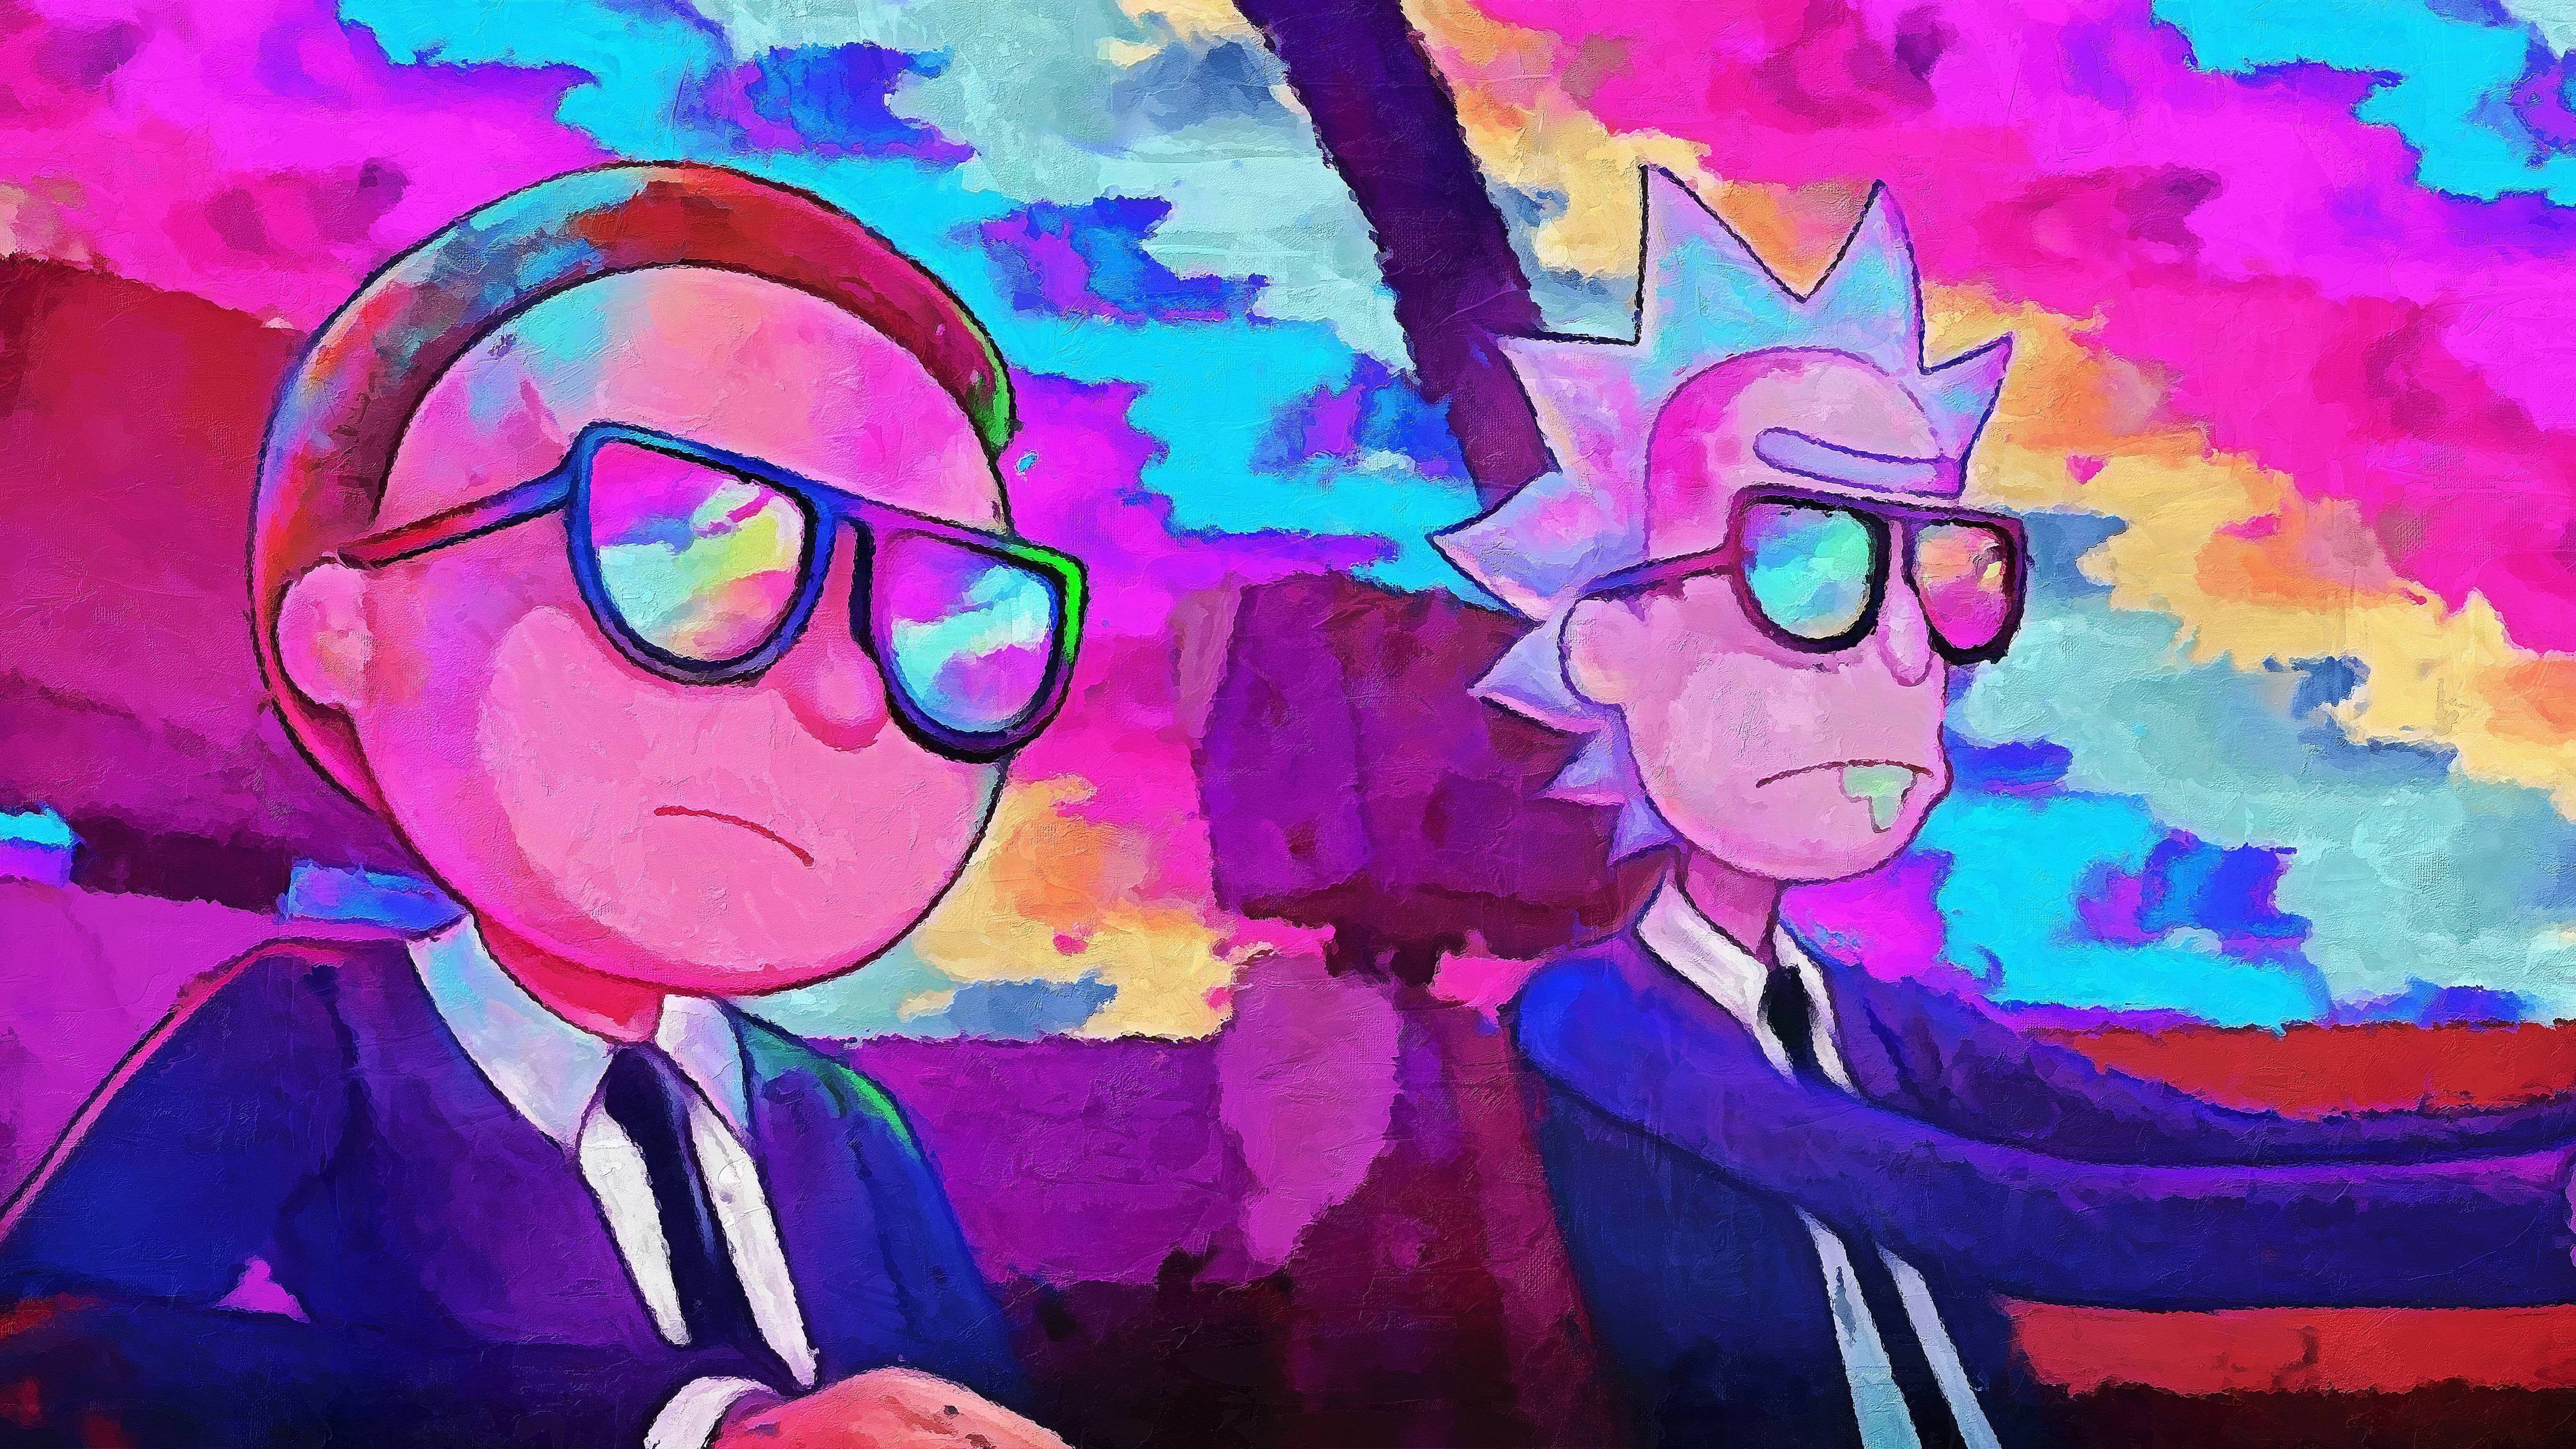 Rick and Morty artwork with a colorful, cartoon-like aesthetic. - Rick and Morty